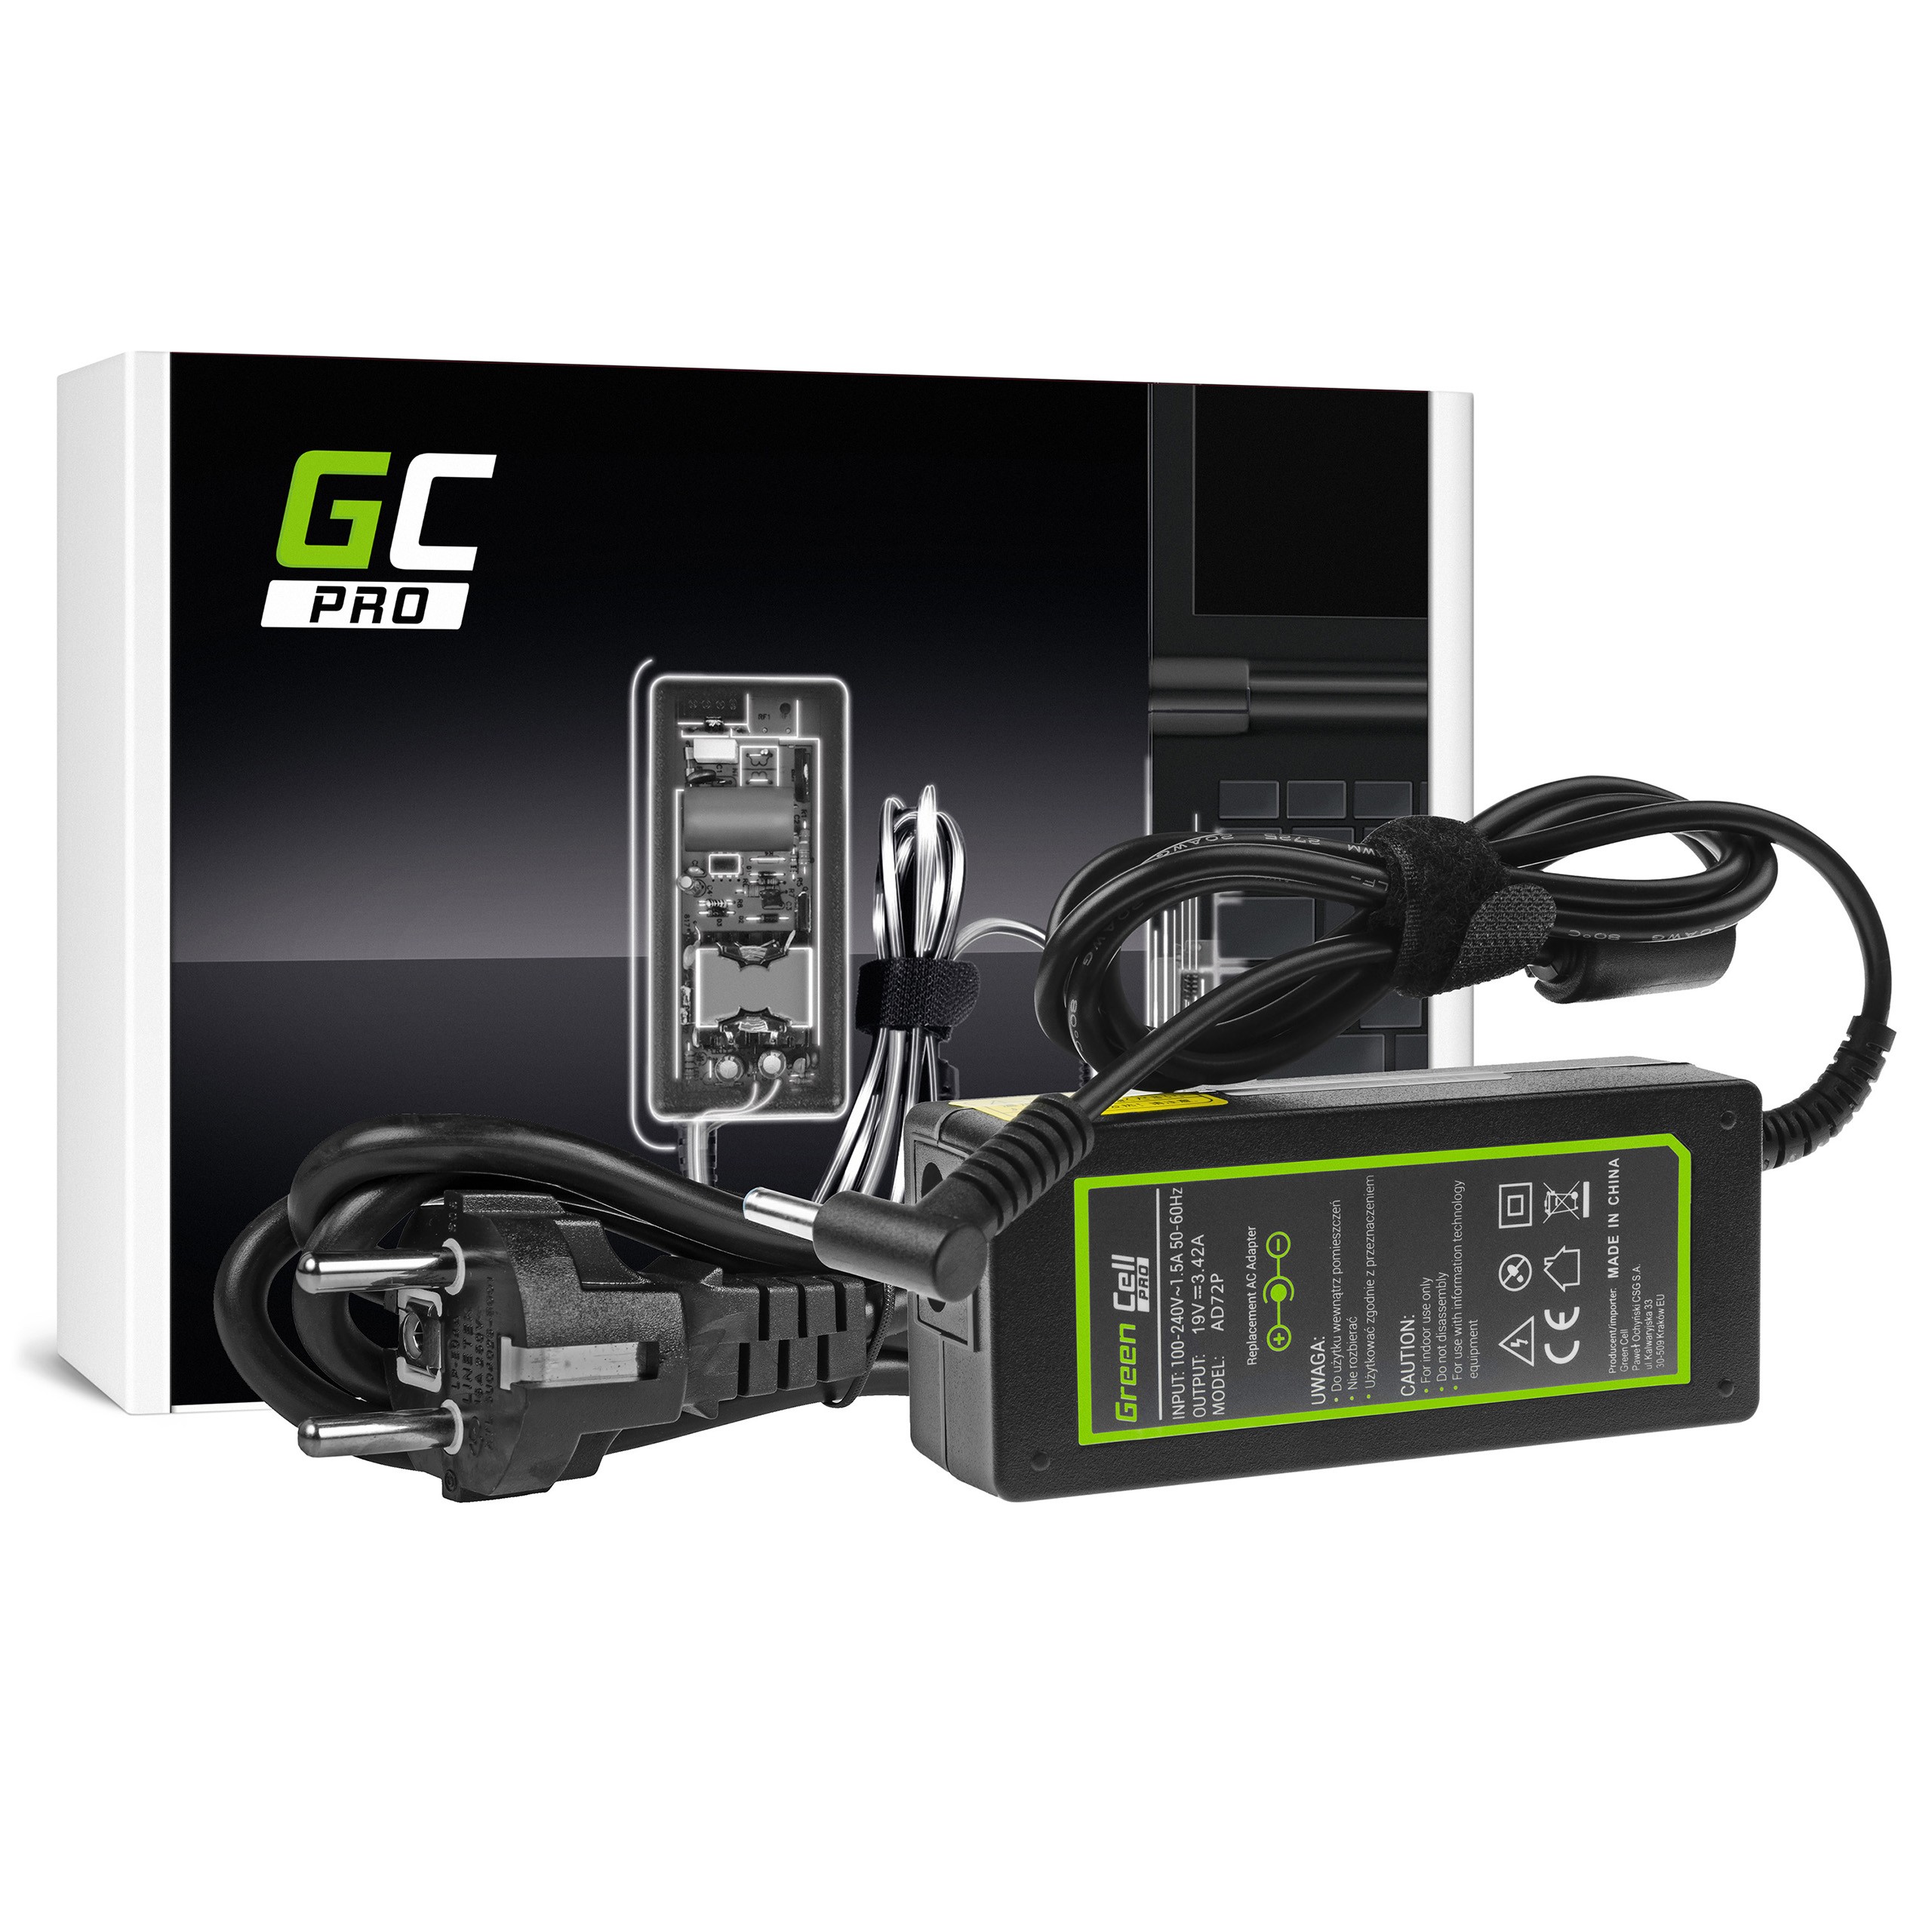 Green Cell PRO lader / AC Adapter til 19V 3.42A 65W AsusPro BU400 BU400A